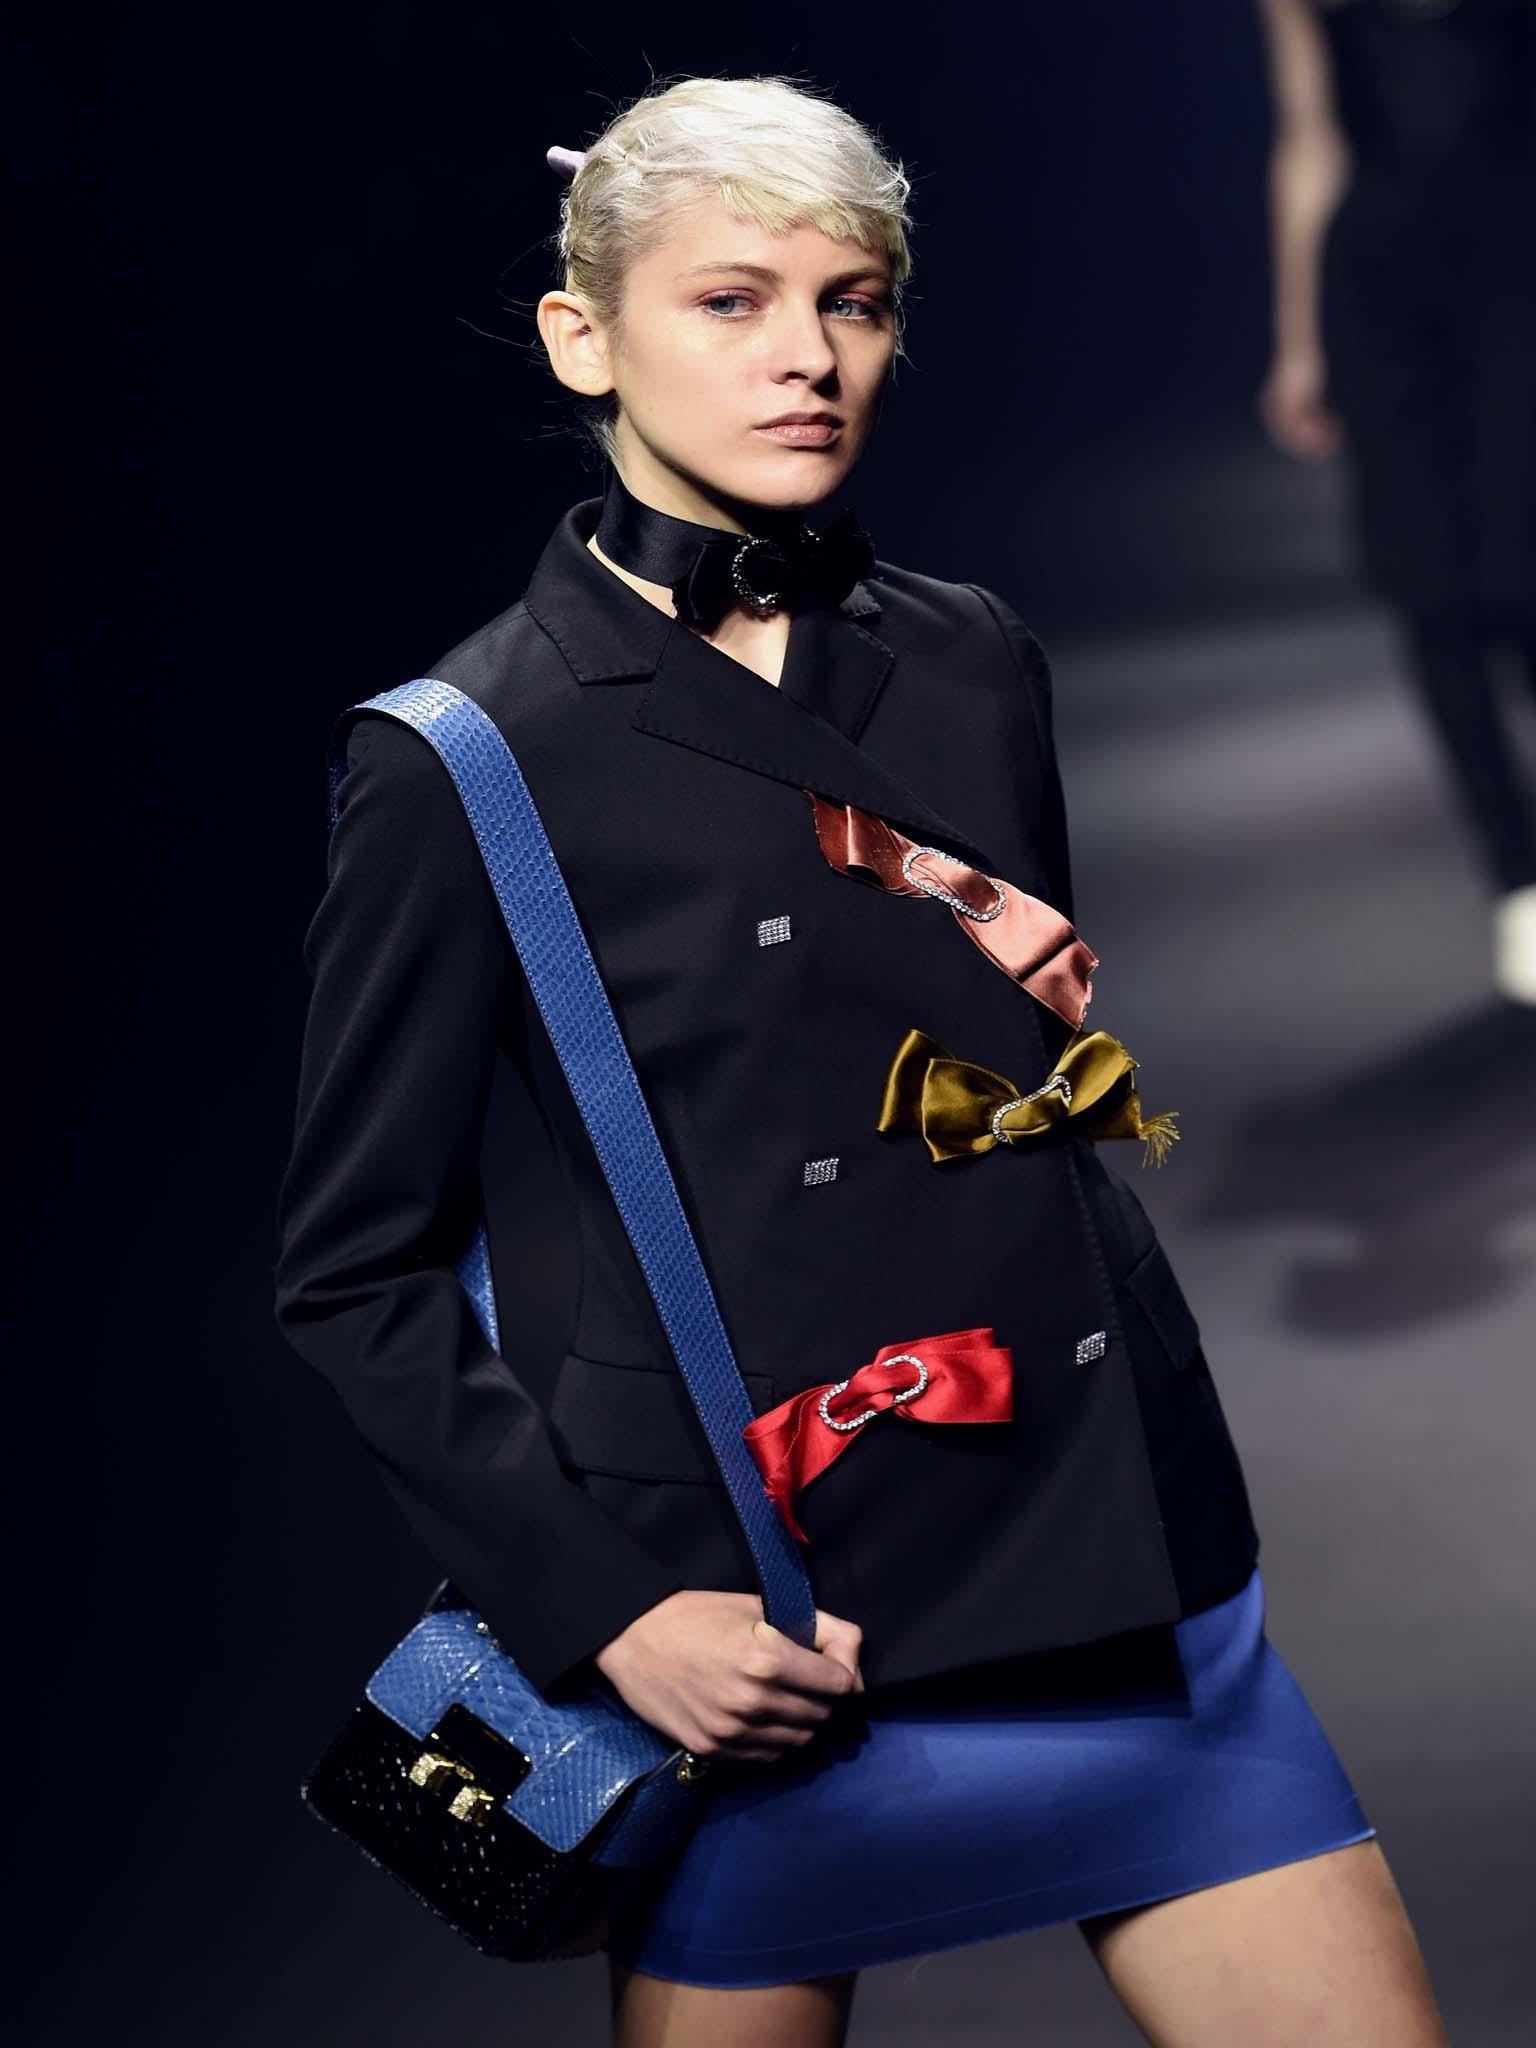 Lanvin Spring Summer 2016 shows you can never reach peak bow